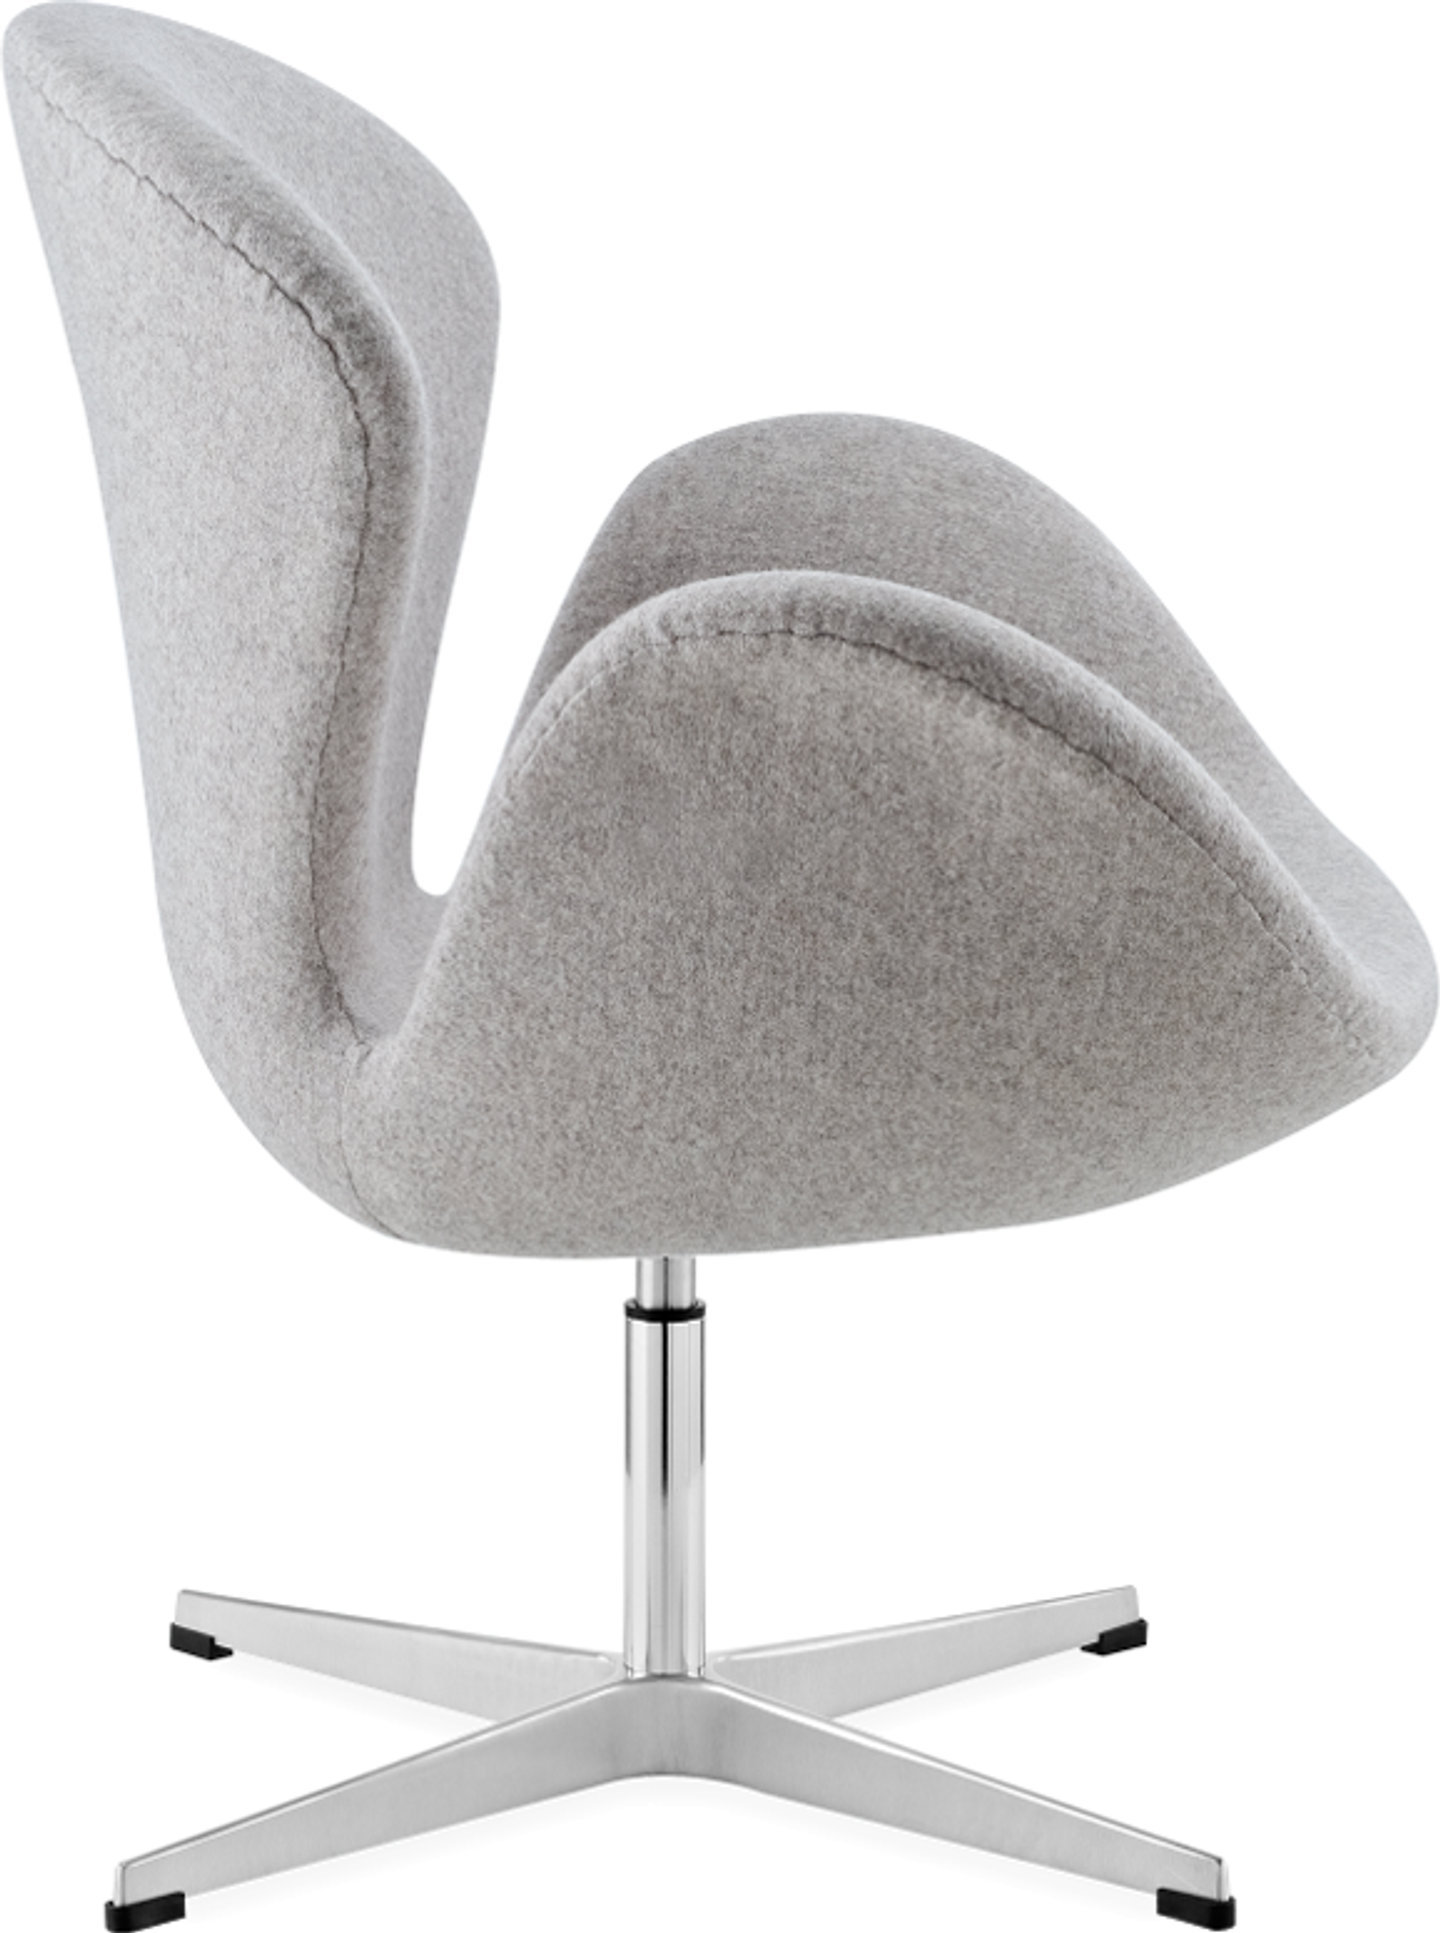 La Silla del Cisne Wool/Without piping/Light Pebble Grey image.